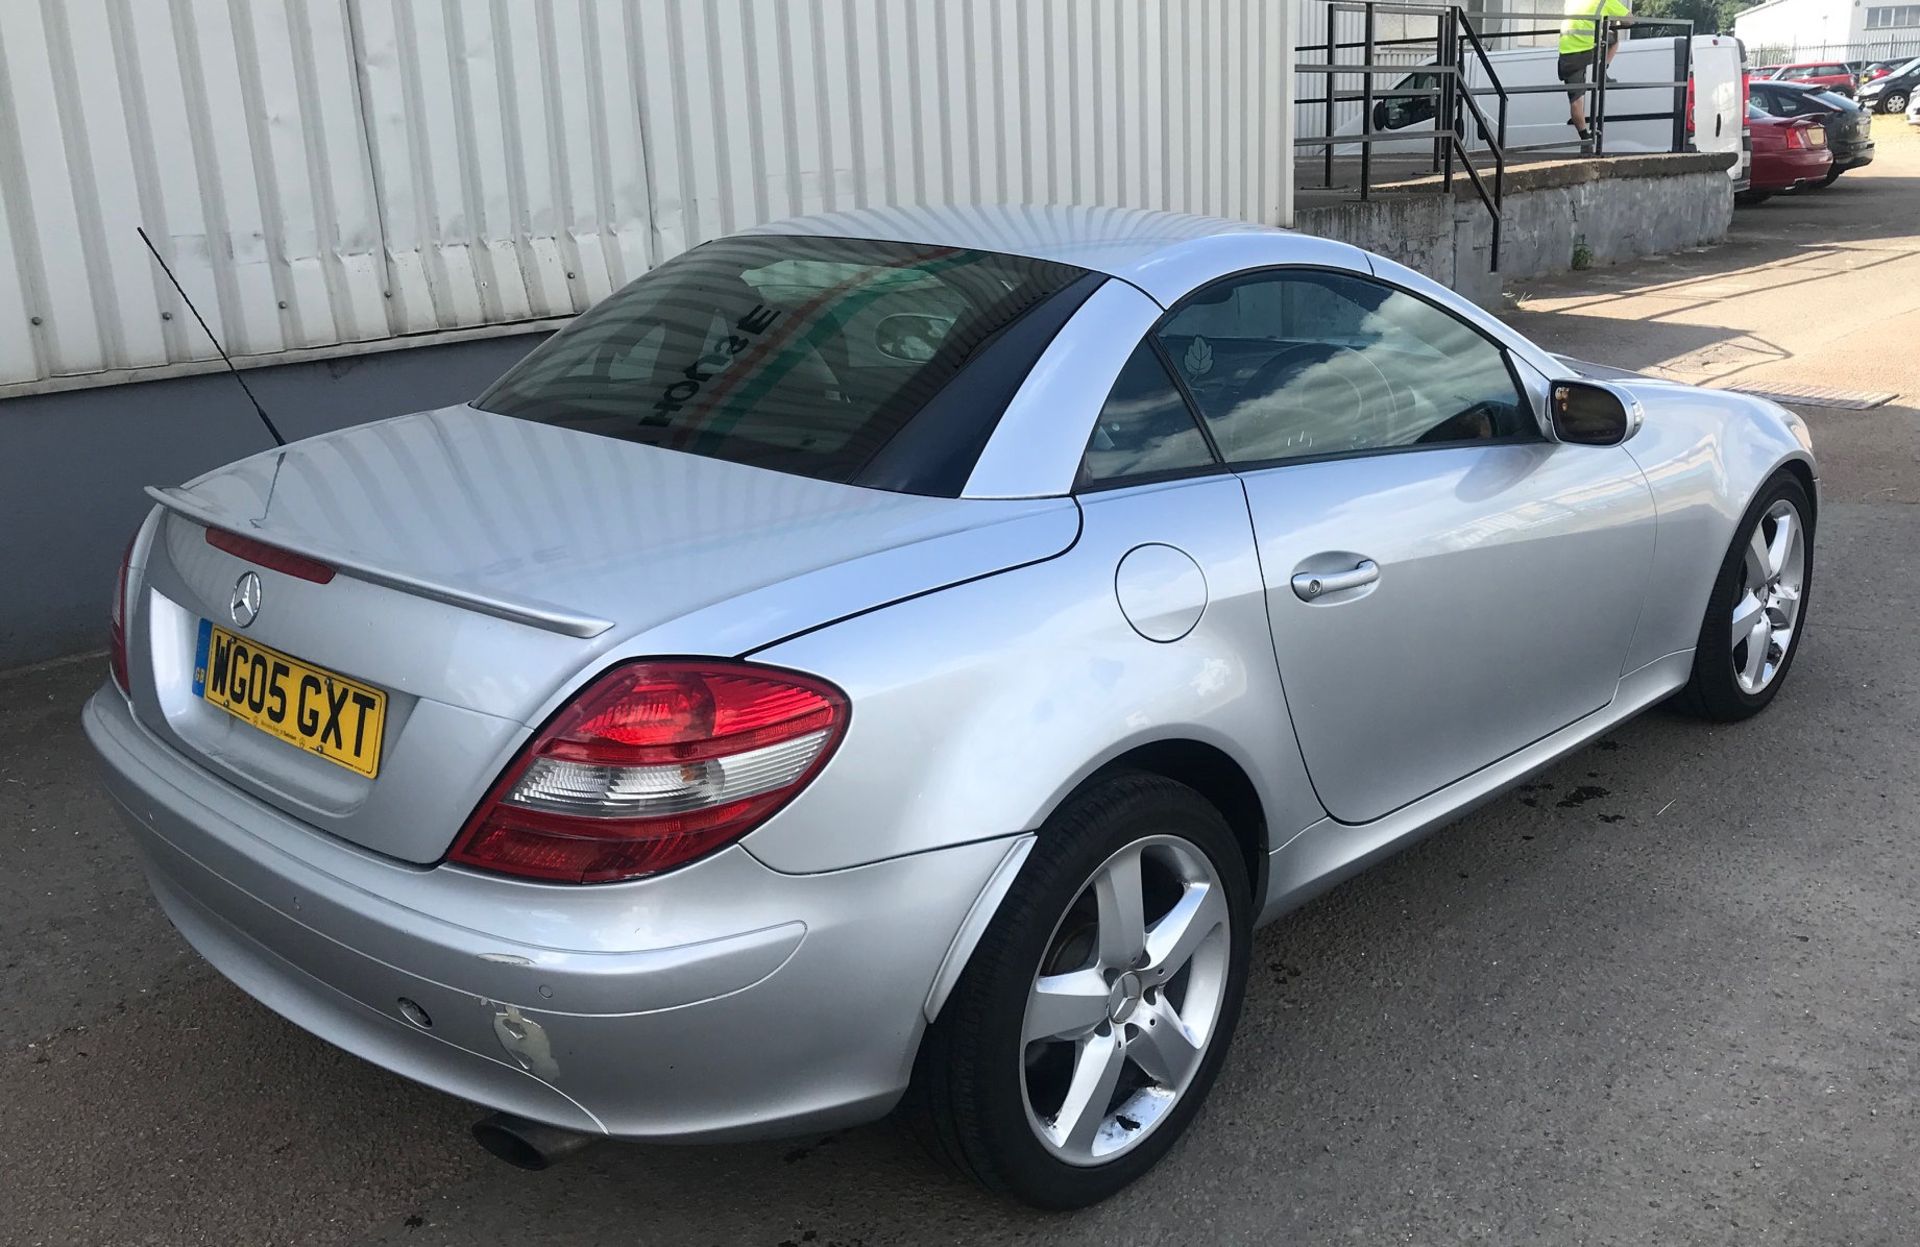 2005 Mercedes SLK 350 2 Dr Convertible - CL505 - NO VAT ON THE HAMMER - Location: Corby, N - Image 16 of 18